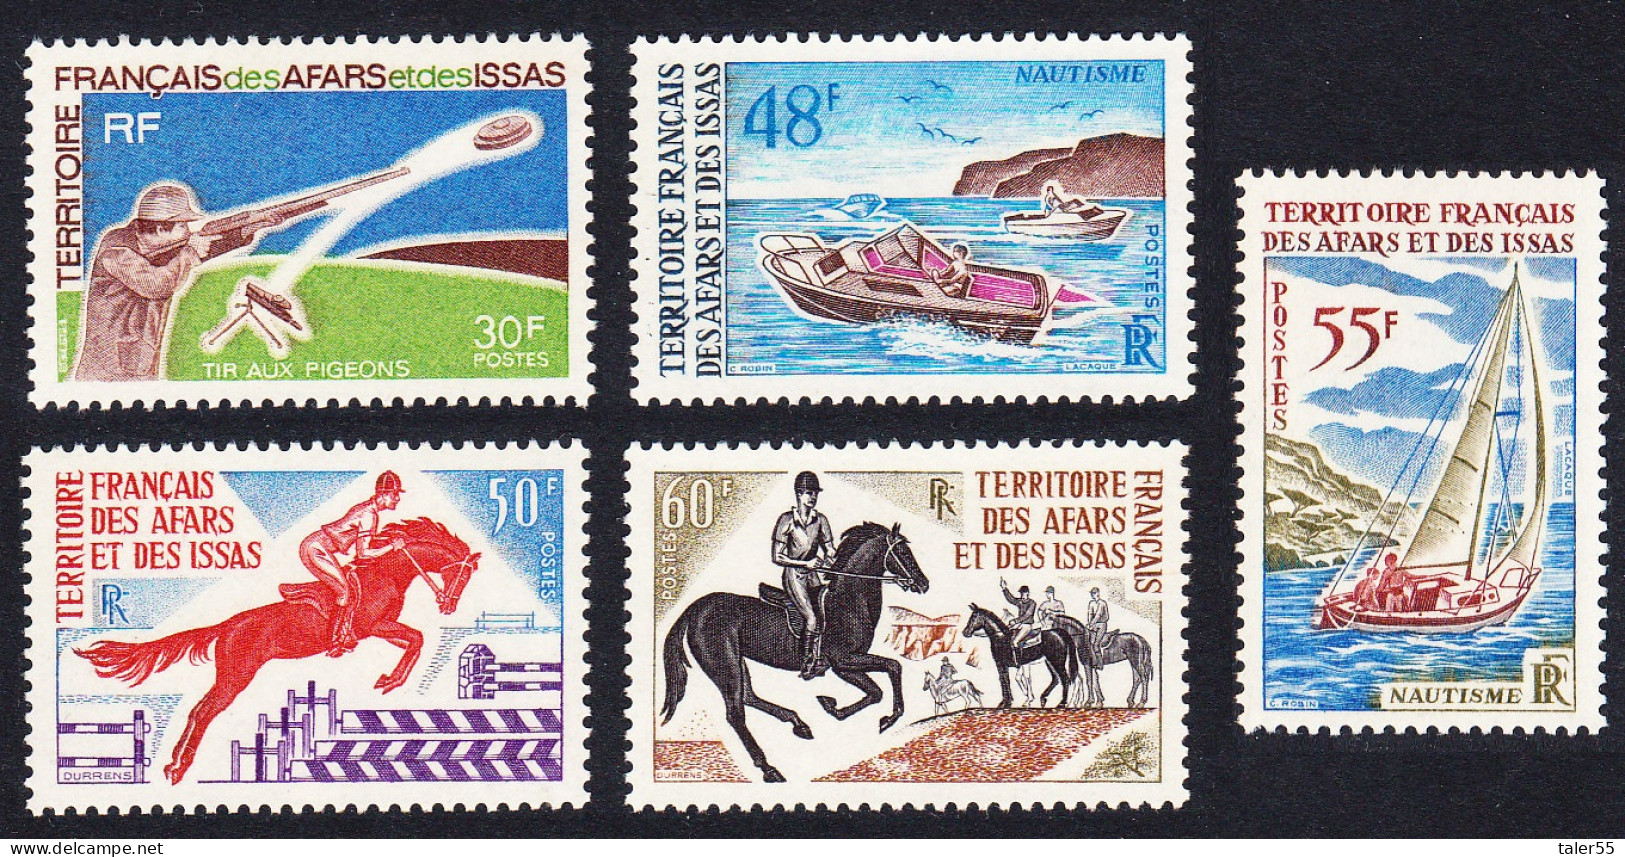 Afar And Issa Pony Trekking Yachting Shooting Sports 5v 1970 MNH SG#549-553 Sc#343-347 - Unused Stamps